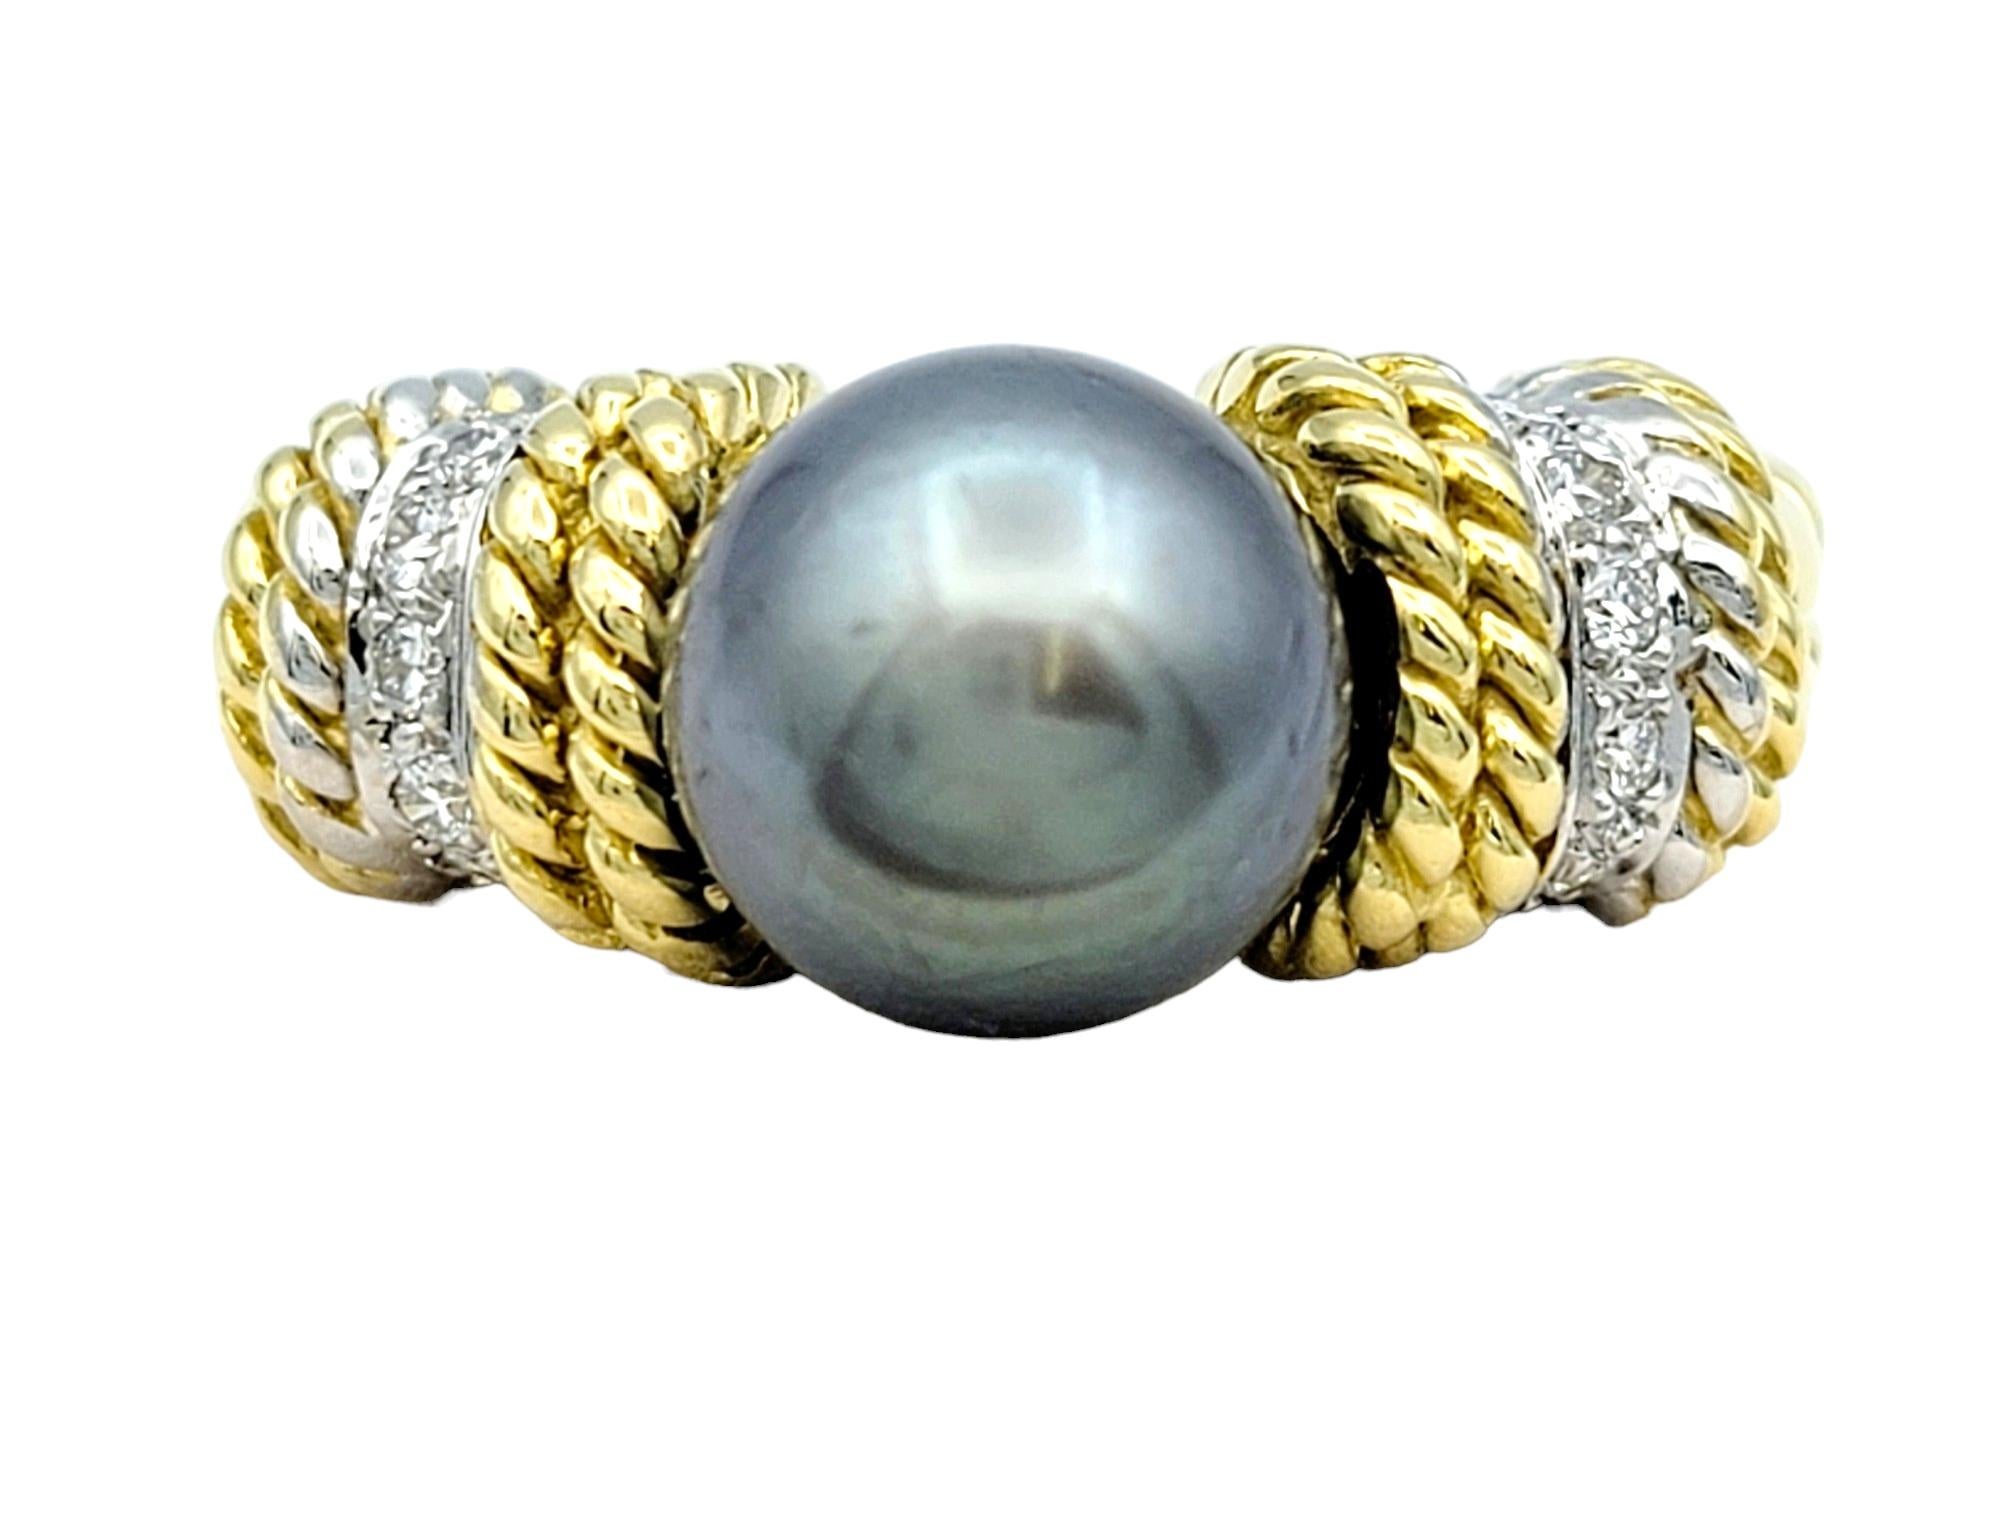 Ring Size: 7

The Cassis Tahitian Pearl Ring exudes sophistication and elegance with its timeless design and exquisite craftsmanship. Crafted in luxurious yellow gold, the band of the ring features intricate ridged detailing that adds texture and